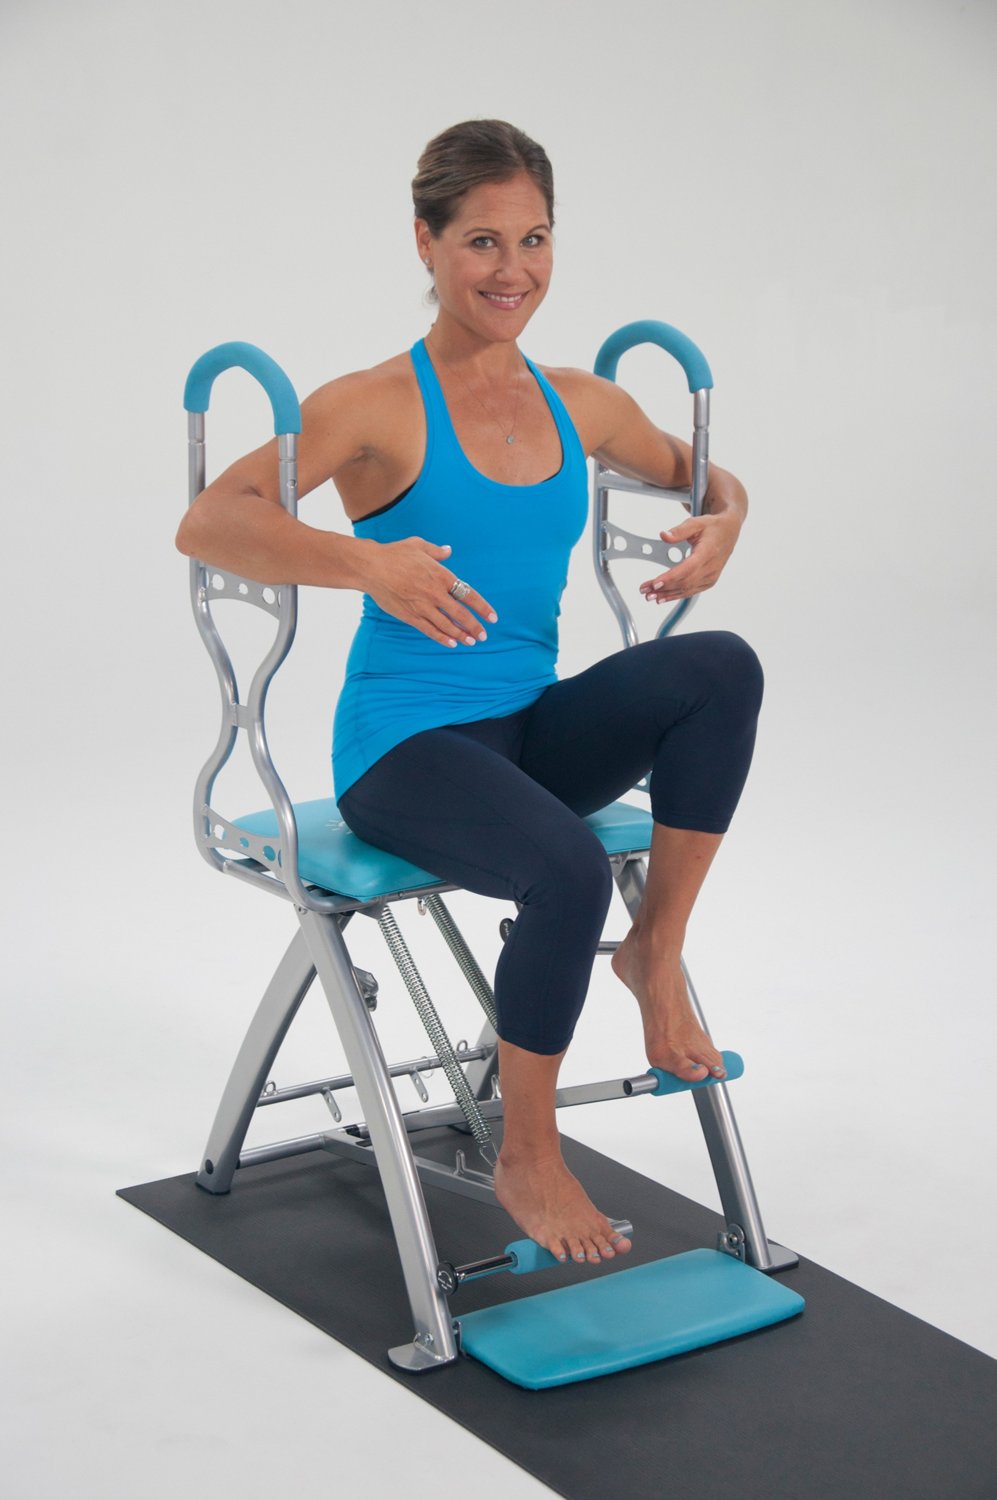 New Lifes A Beach Pilates Pro Chair Max With Sculpting Handles for Large Space